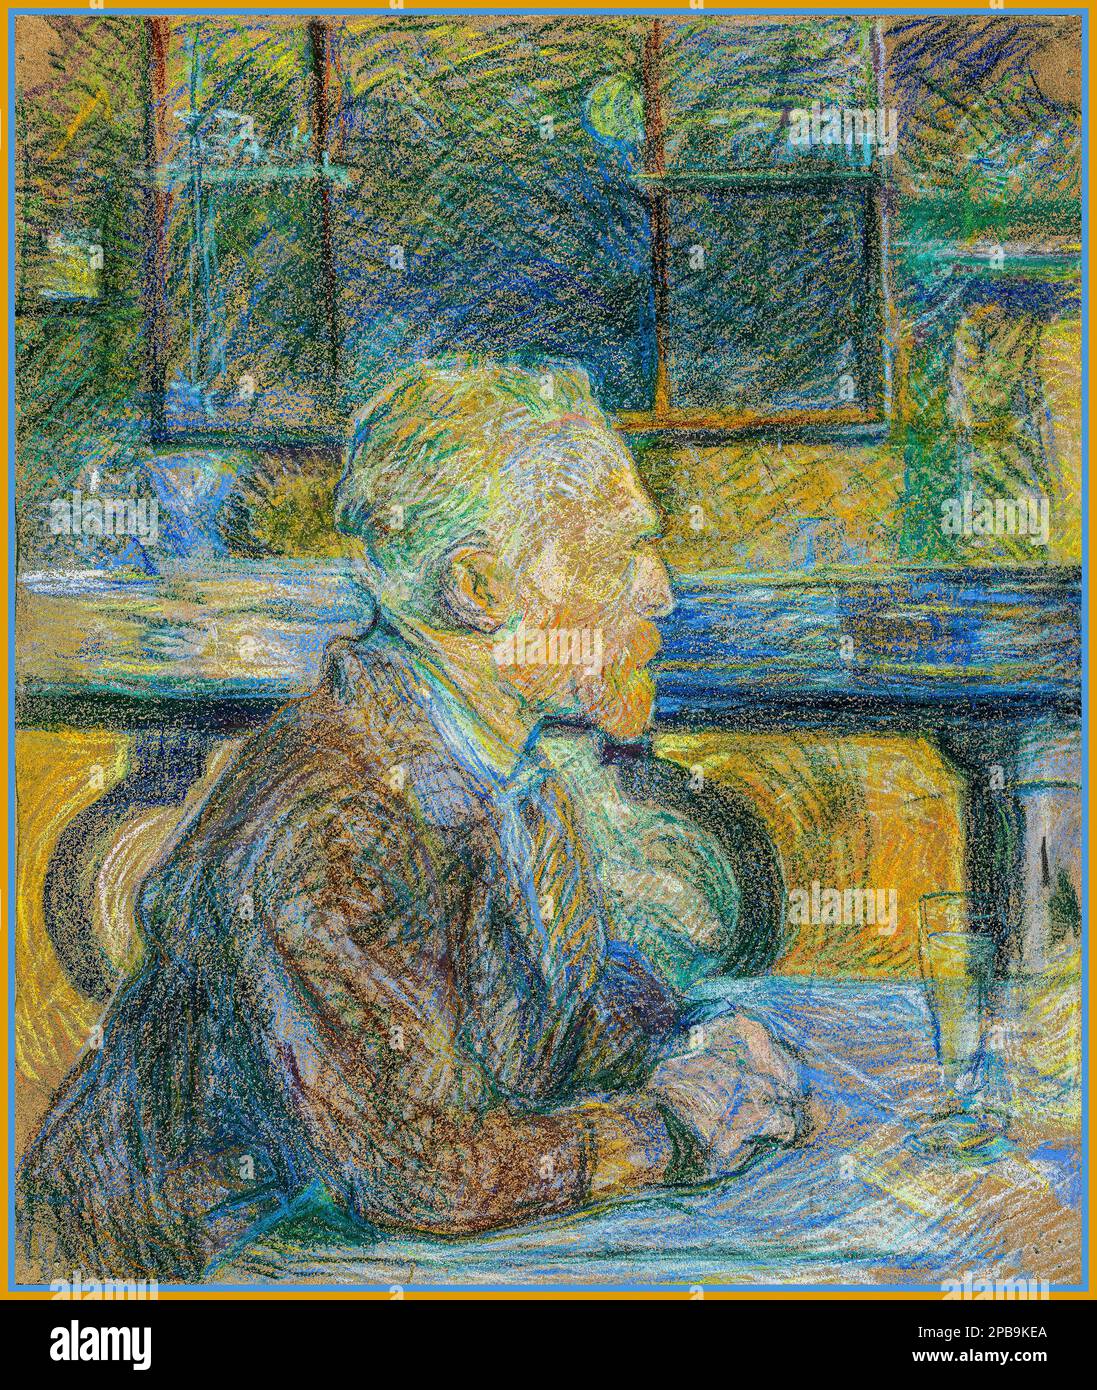 VINCENT VAN GOGH by Toulouse-Lautrec portrait of Henri Vincent van Gogh Portrait of Vincent van Gogh (1887).Portrait of Vincent van Gogh is an 1887 chalk pastel on cardboard by Henri de Toulouse-Lautrec. Toulouse-Lautrec had encountered Vincent van Gogh, eleven years his senior, when they were both taking lessons at the open studio of Fernand Cormon in Paris France from 1886 to 1887 Stock Photo